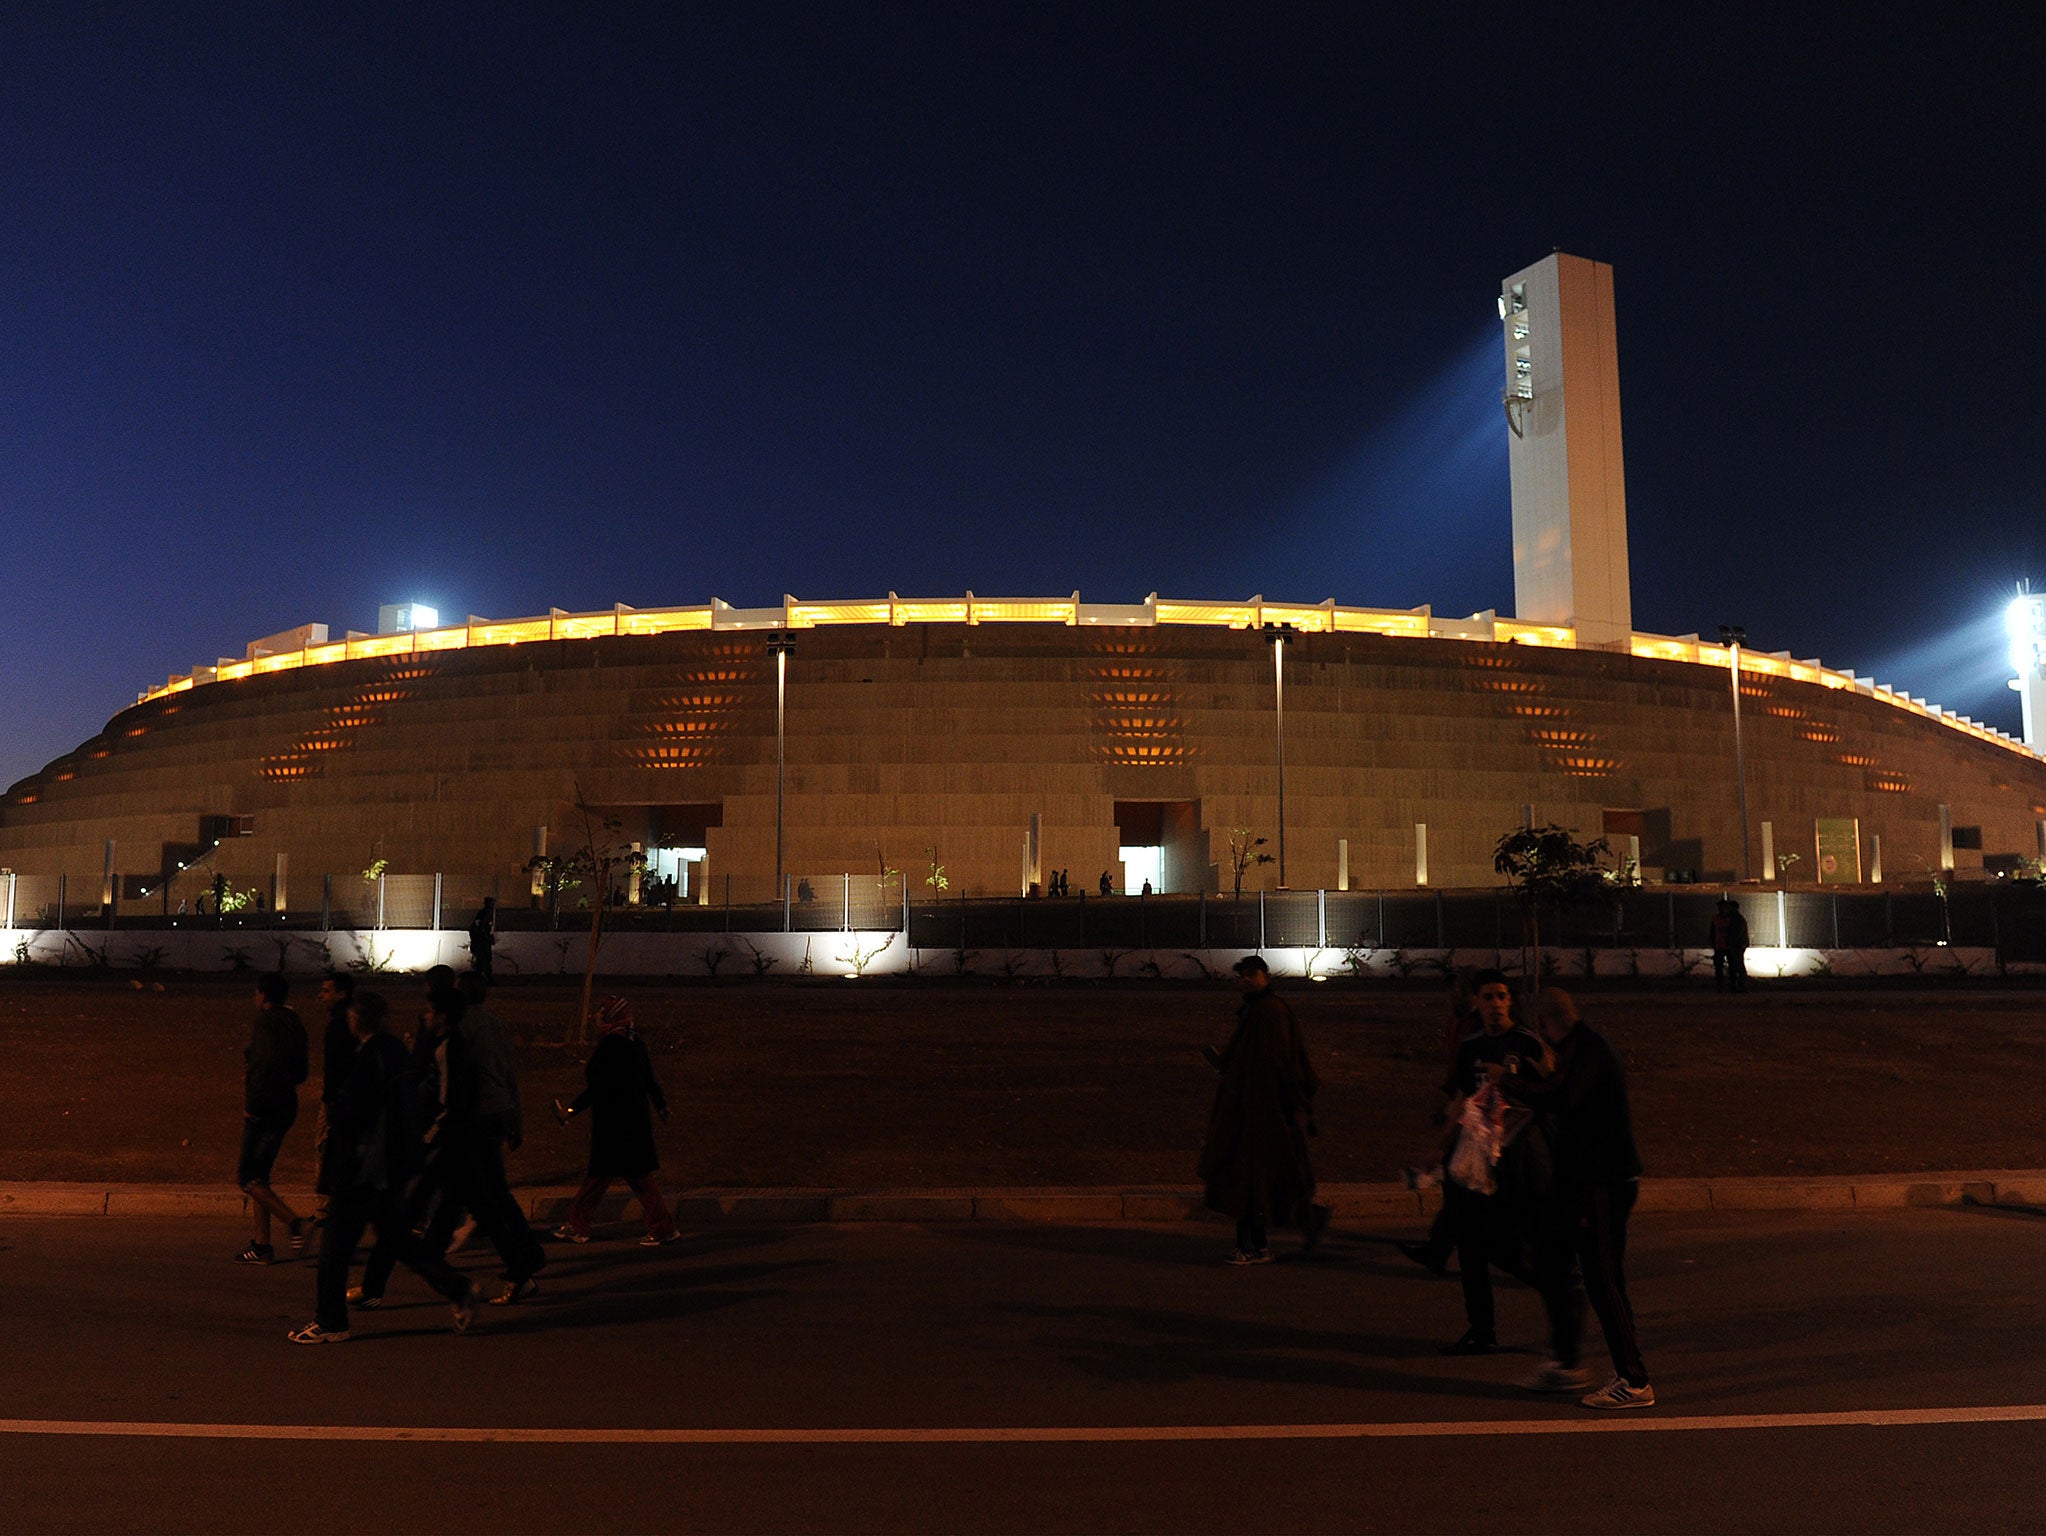 &#13;
The Agadir Stadium offers a glimpse into Morocco's promising infrastructure &#13;